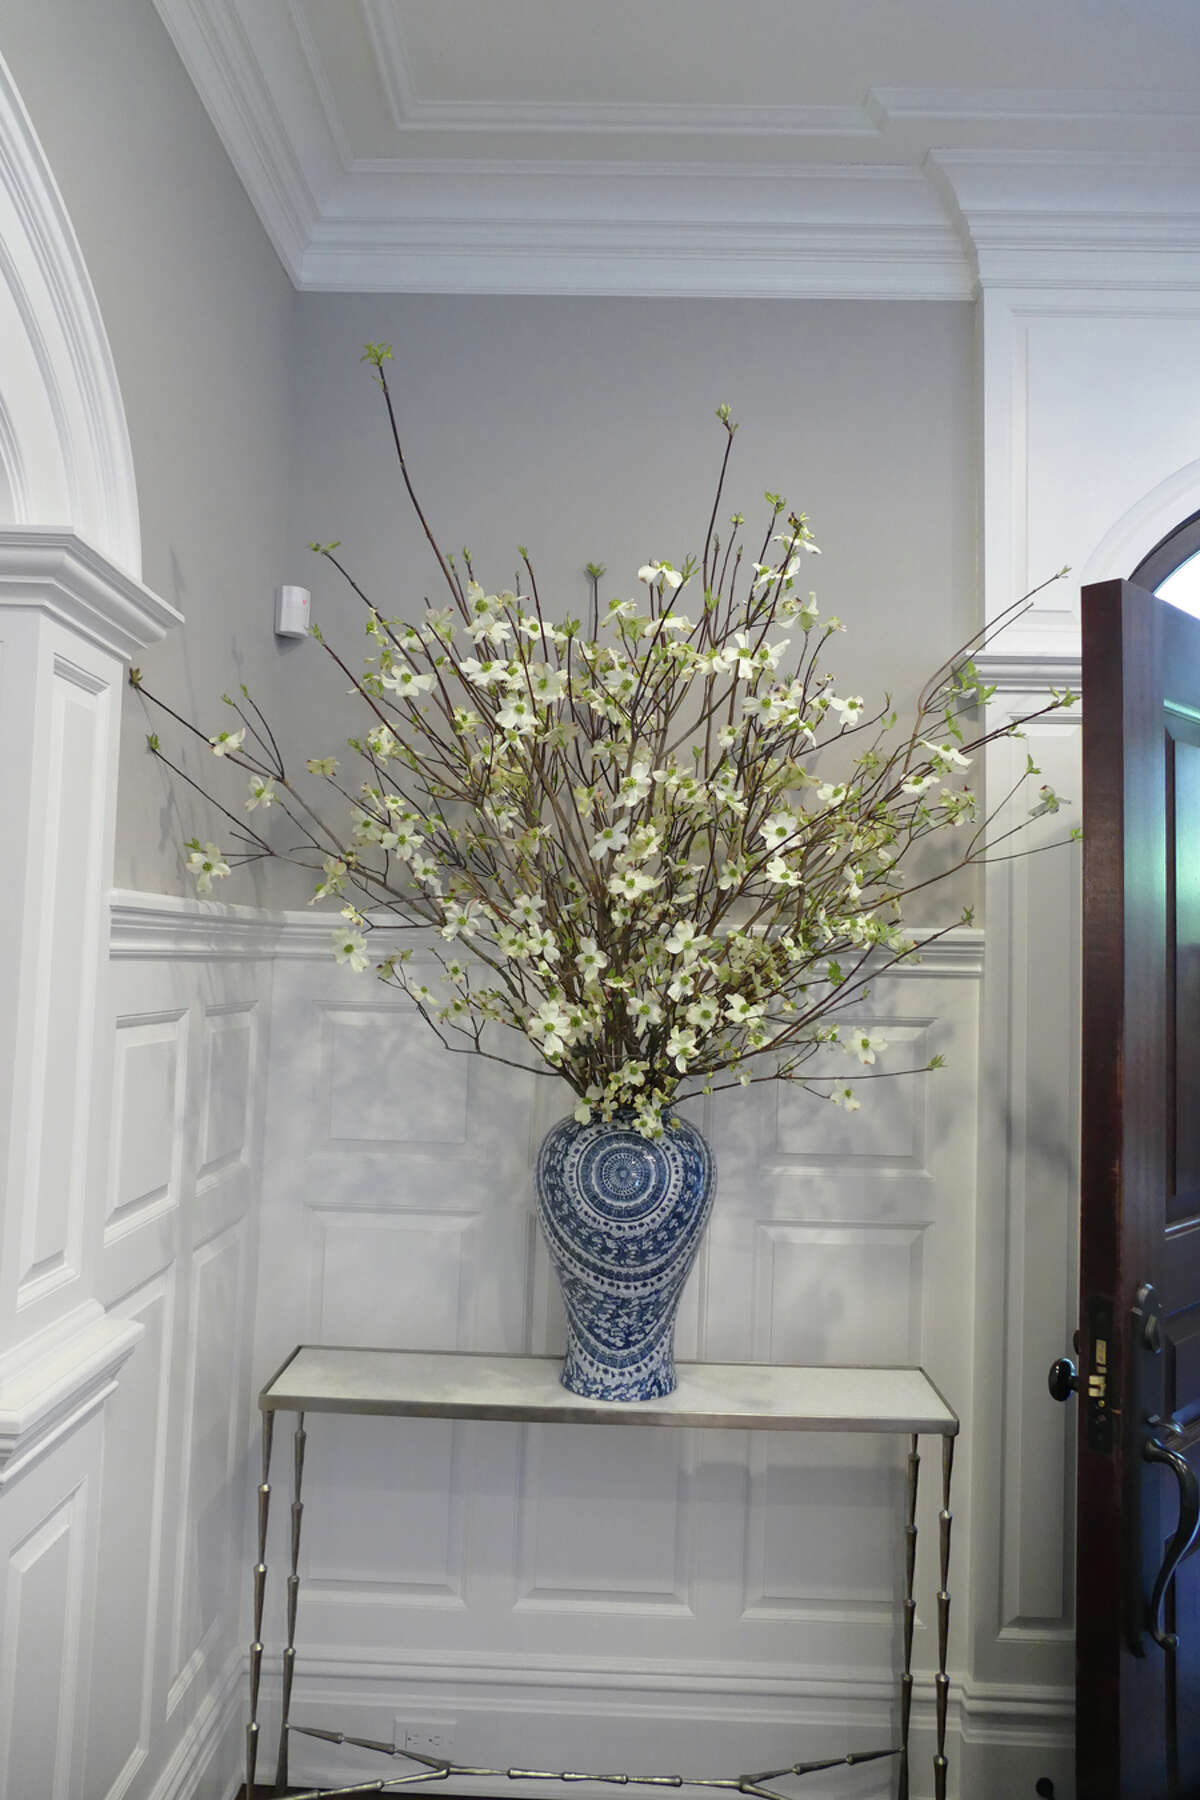 The homes on the New Canaan Cares Kitchen & Home Tour have exquisite interior detail as seen during the tour on Thursday, May 16, 2019. Grace Duffield / Hearst Connecticut Media